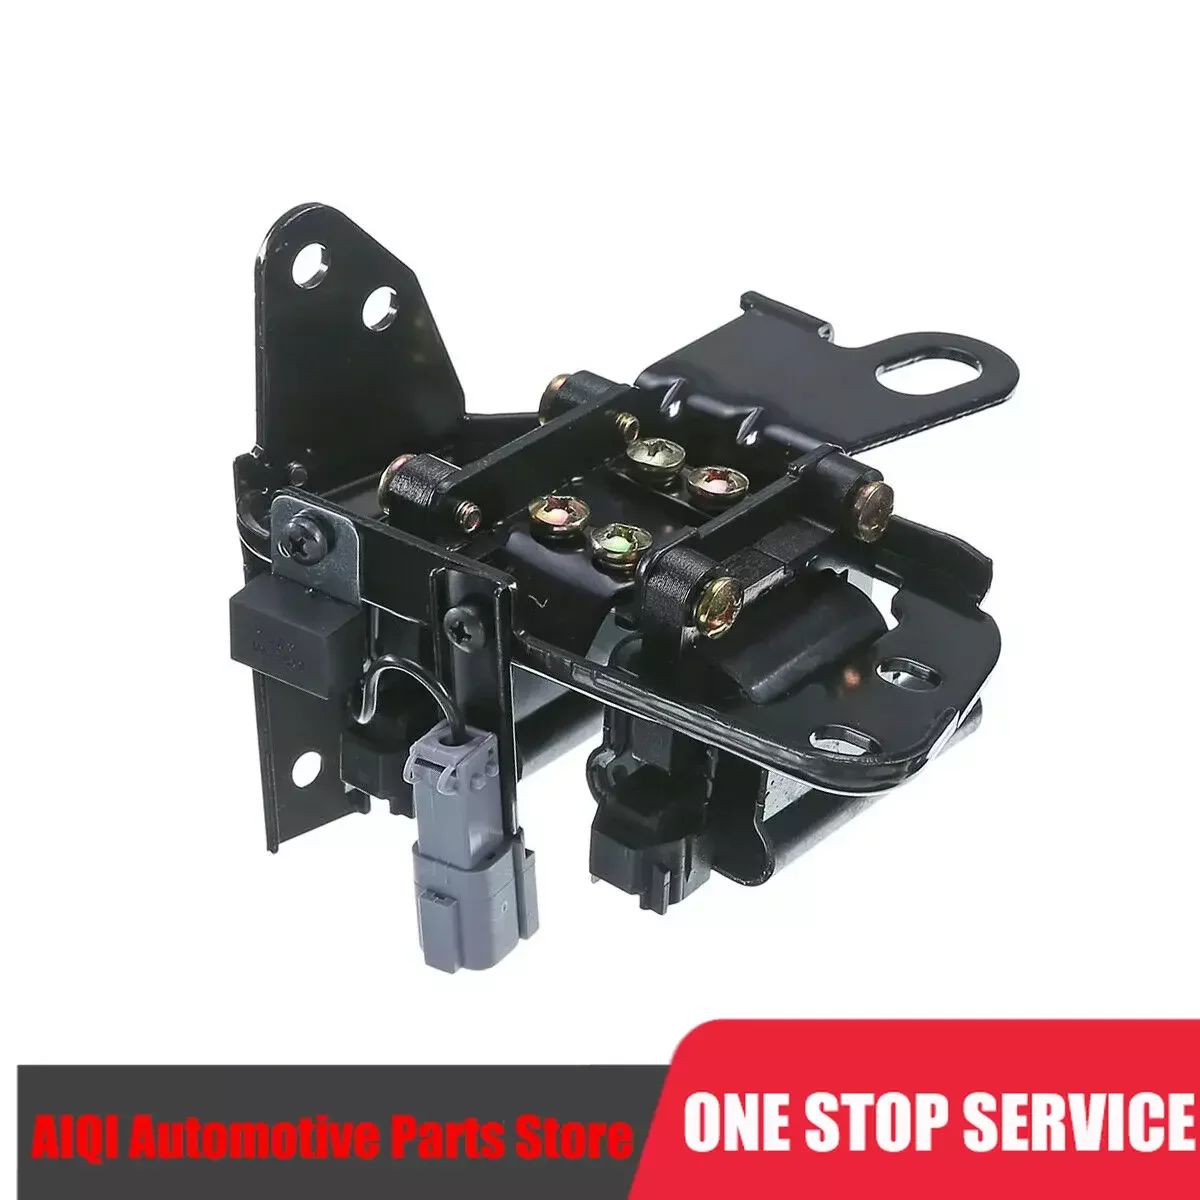 

Ignition Coil Pack UF-340 For Hyundai Elantra 2001-2003 I4 2.0L G4CP 27301-23500